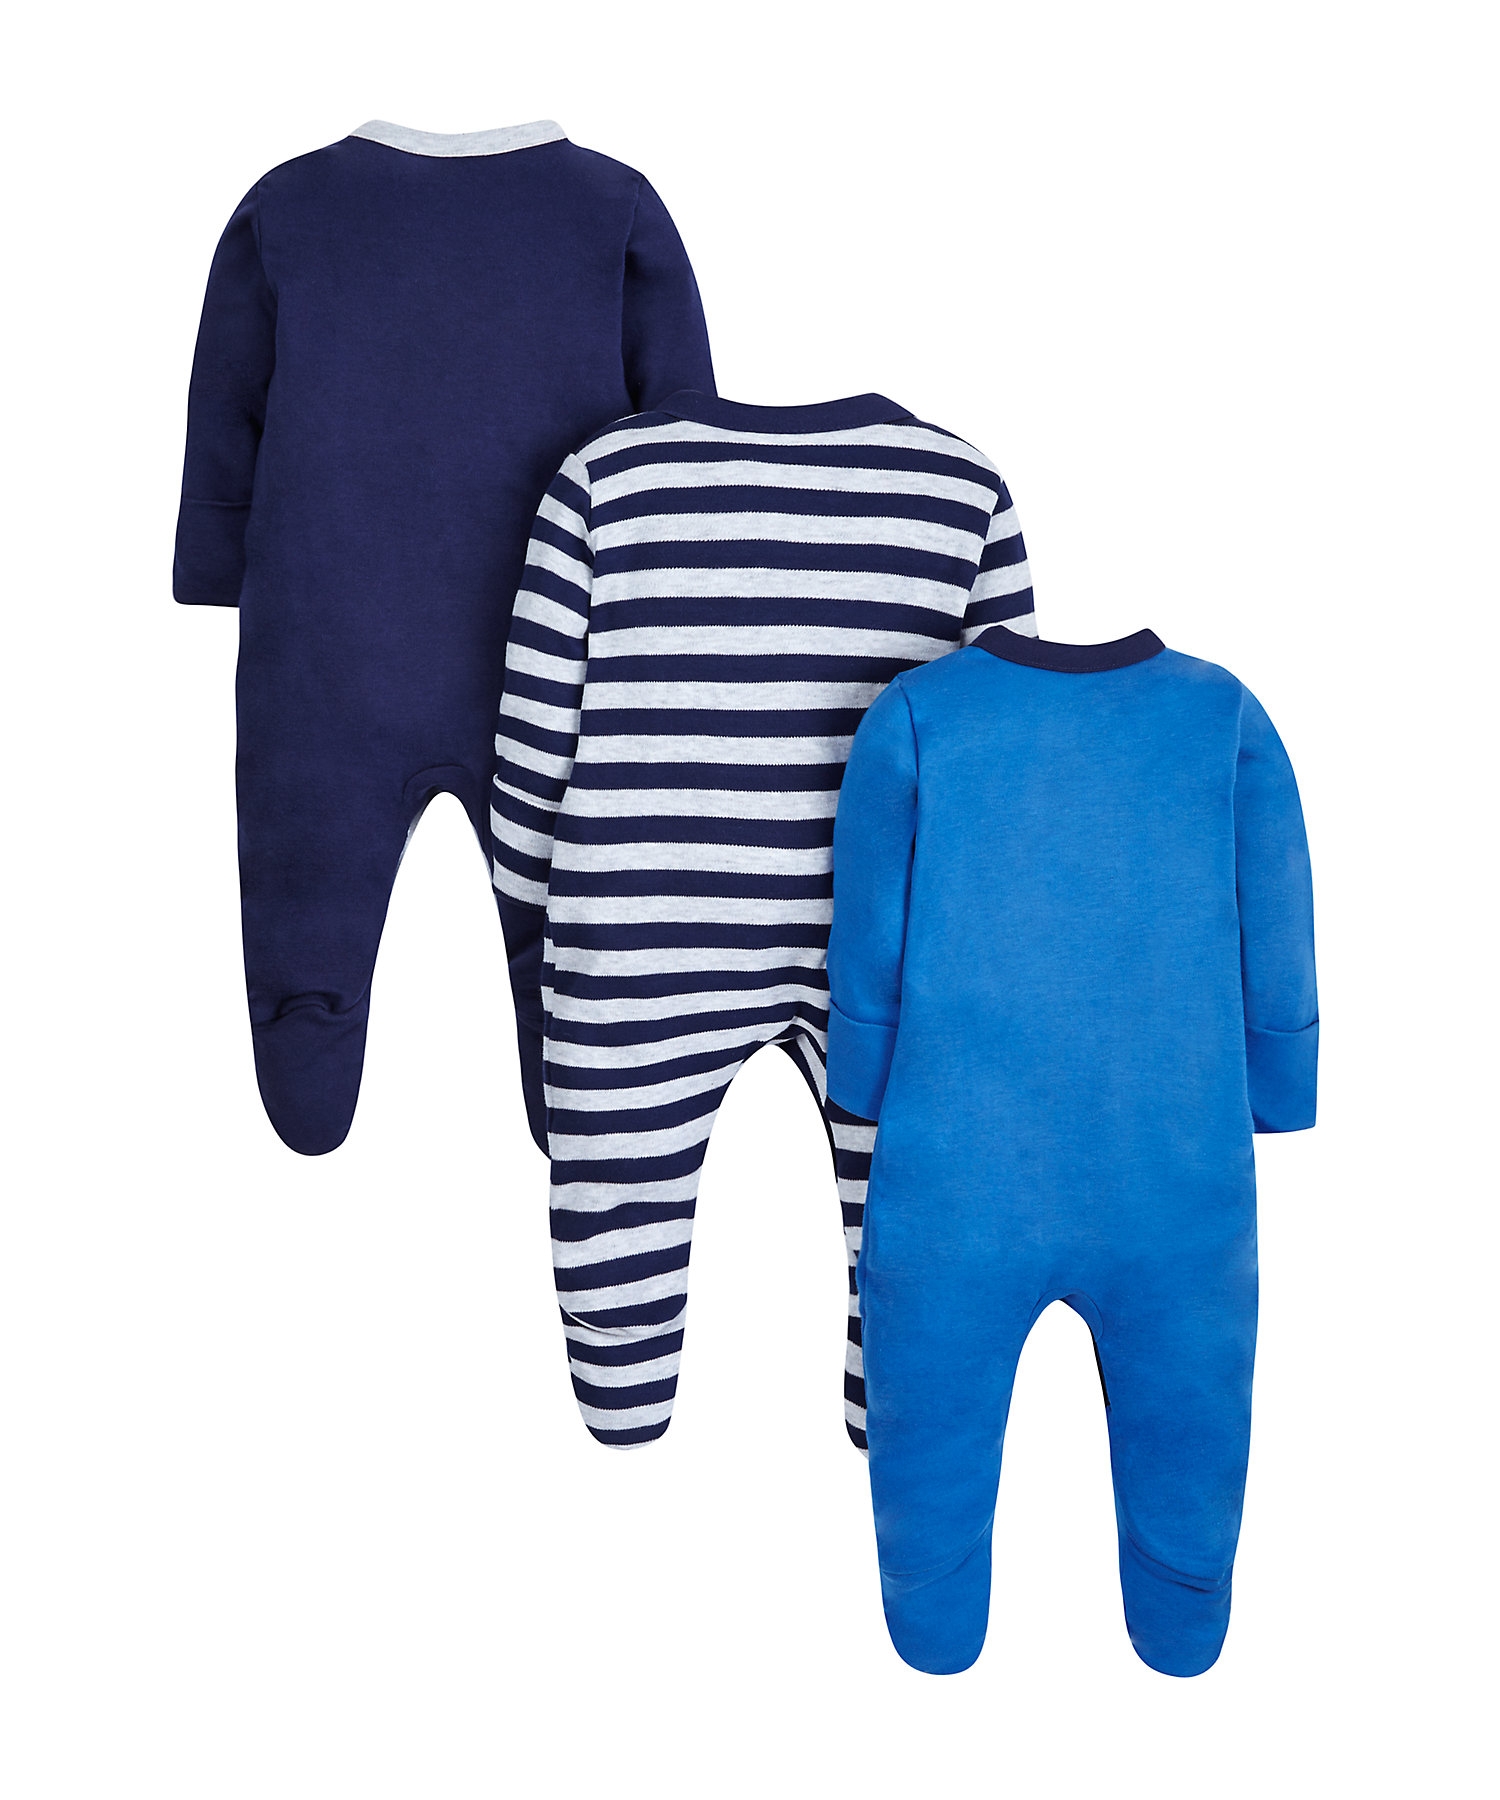 Mothercare | Boys Full Sleeves Sleepsuit Embroidered And Striped - Pack Of 3 - Blue 1